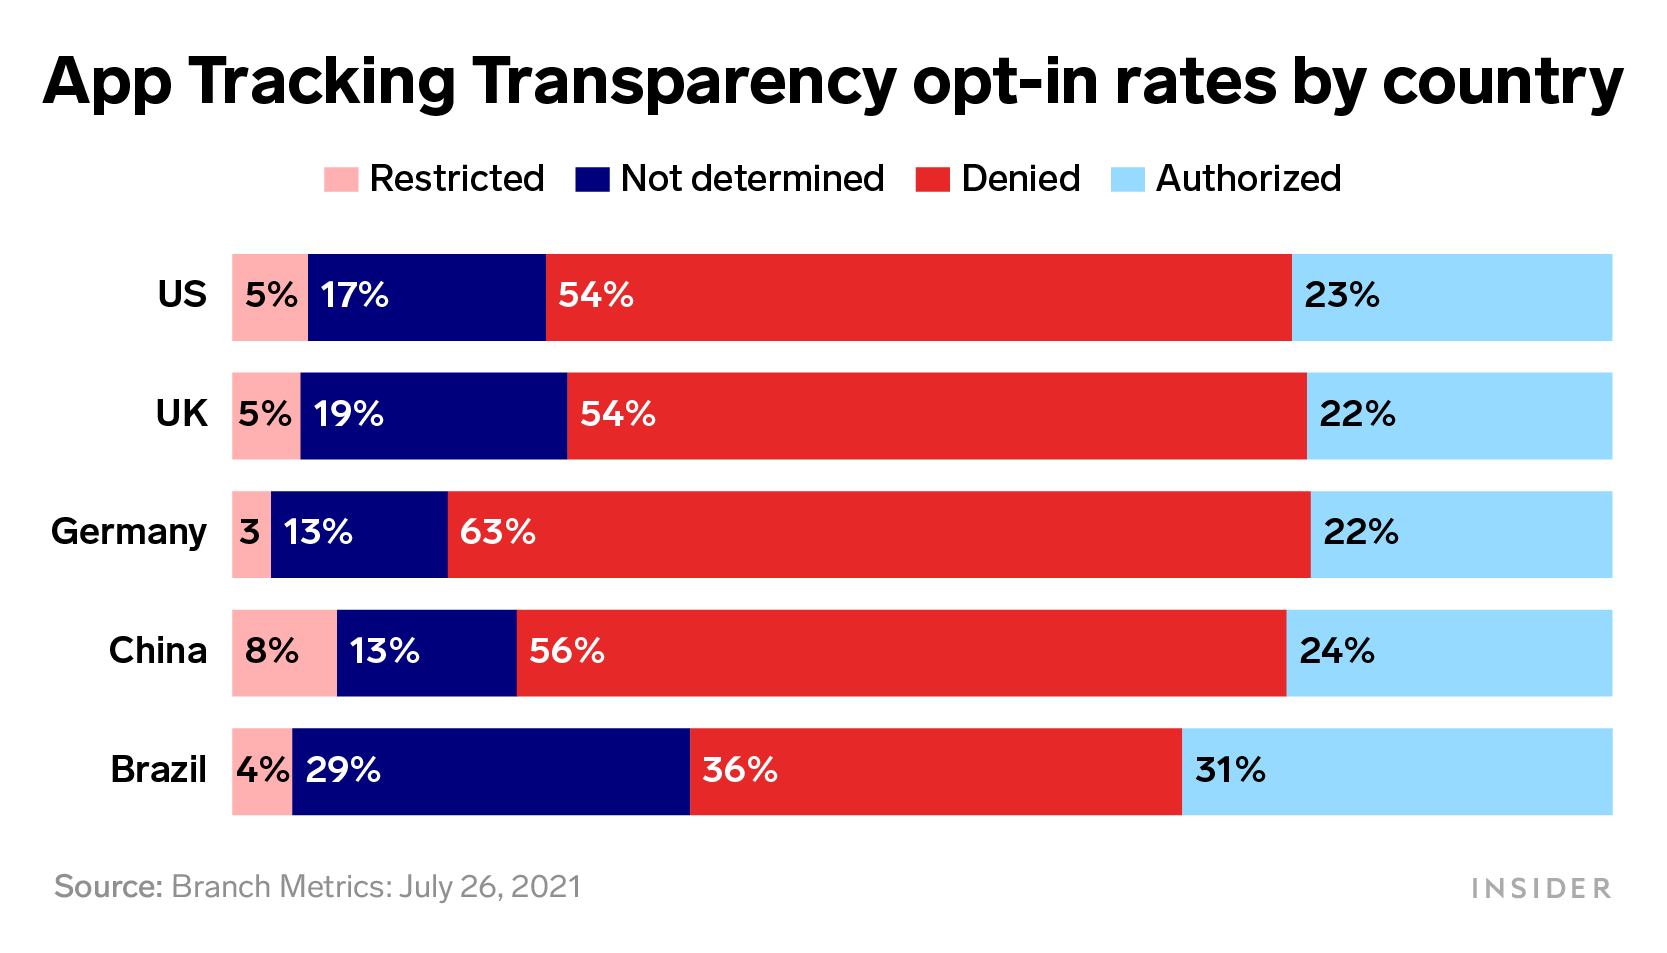 A chart showing App Tracking Transparency opt-in rates by country.